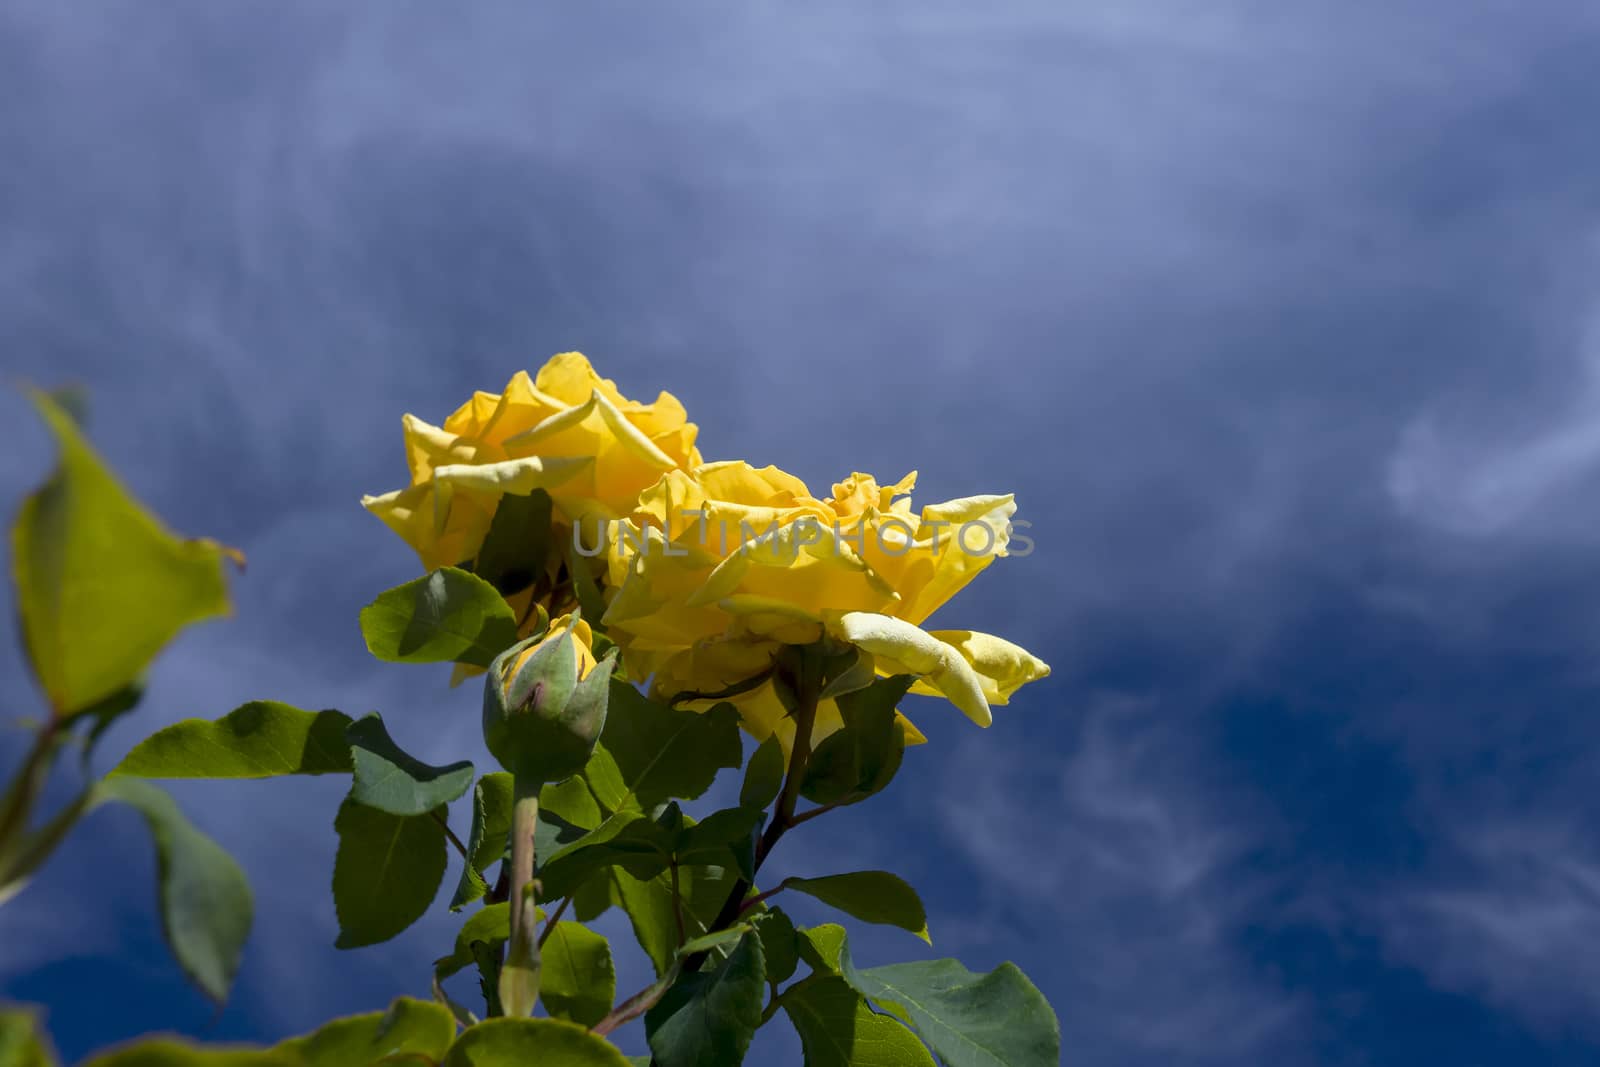 This photo was taken at a formal botanical garden near San Francisco, California. Spring had arrived, and flowers are in bloom. This image features a beautiful yellow rose blossoms and with a deep blue sky with wispy clouds.